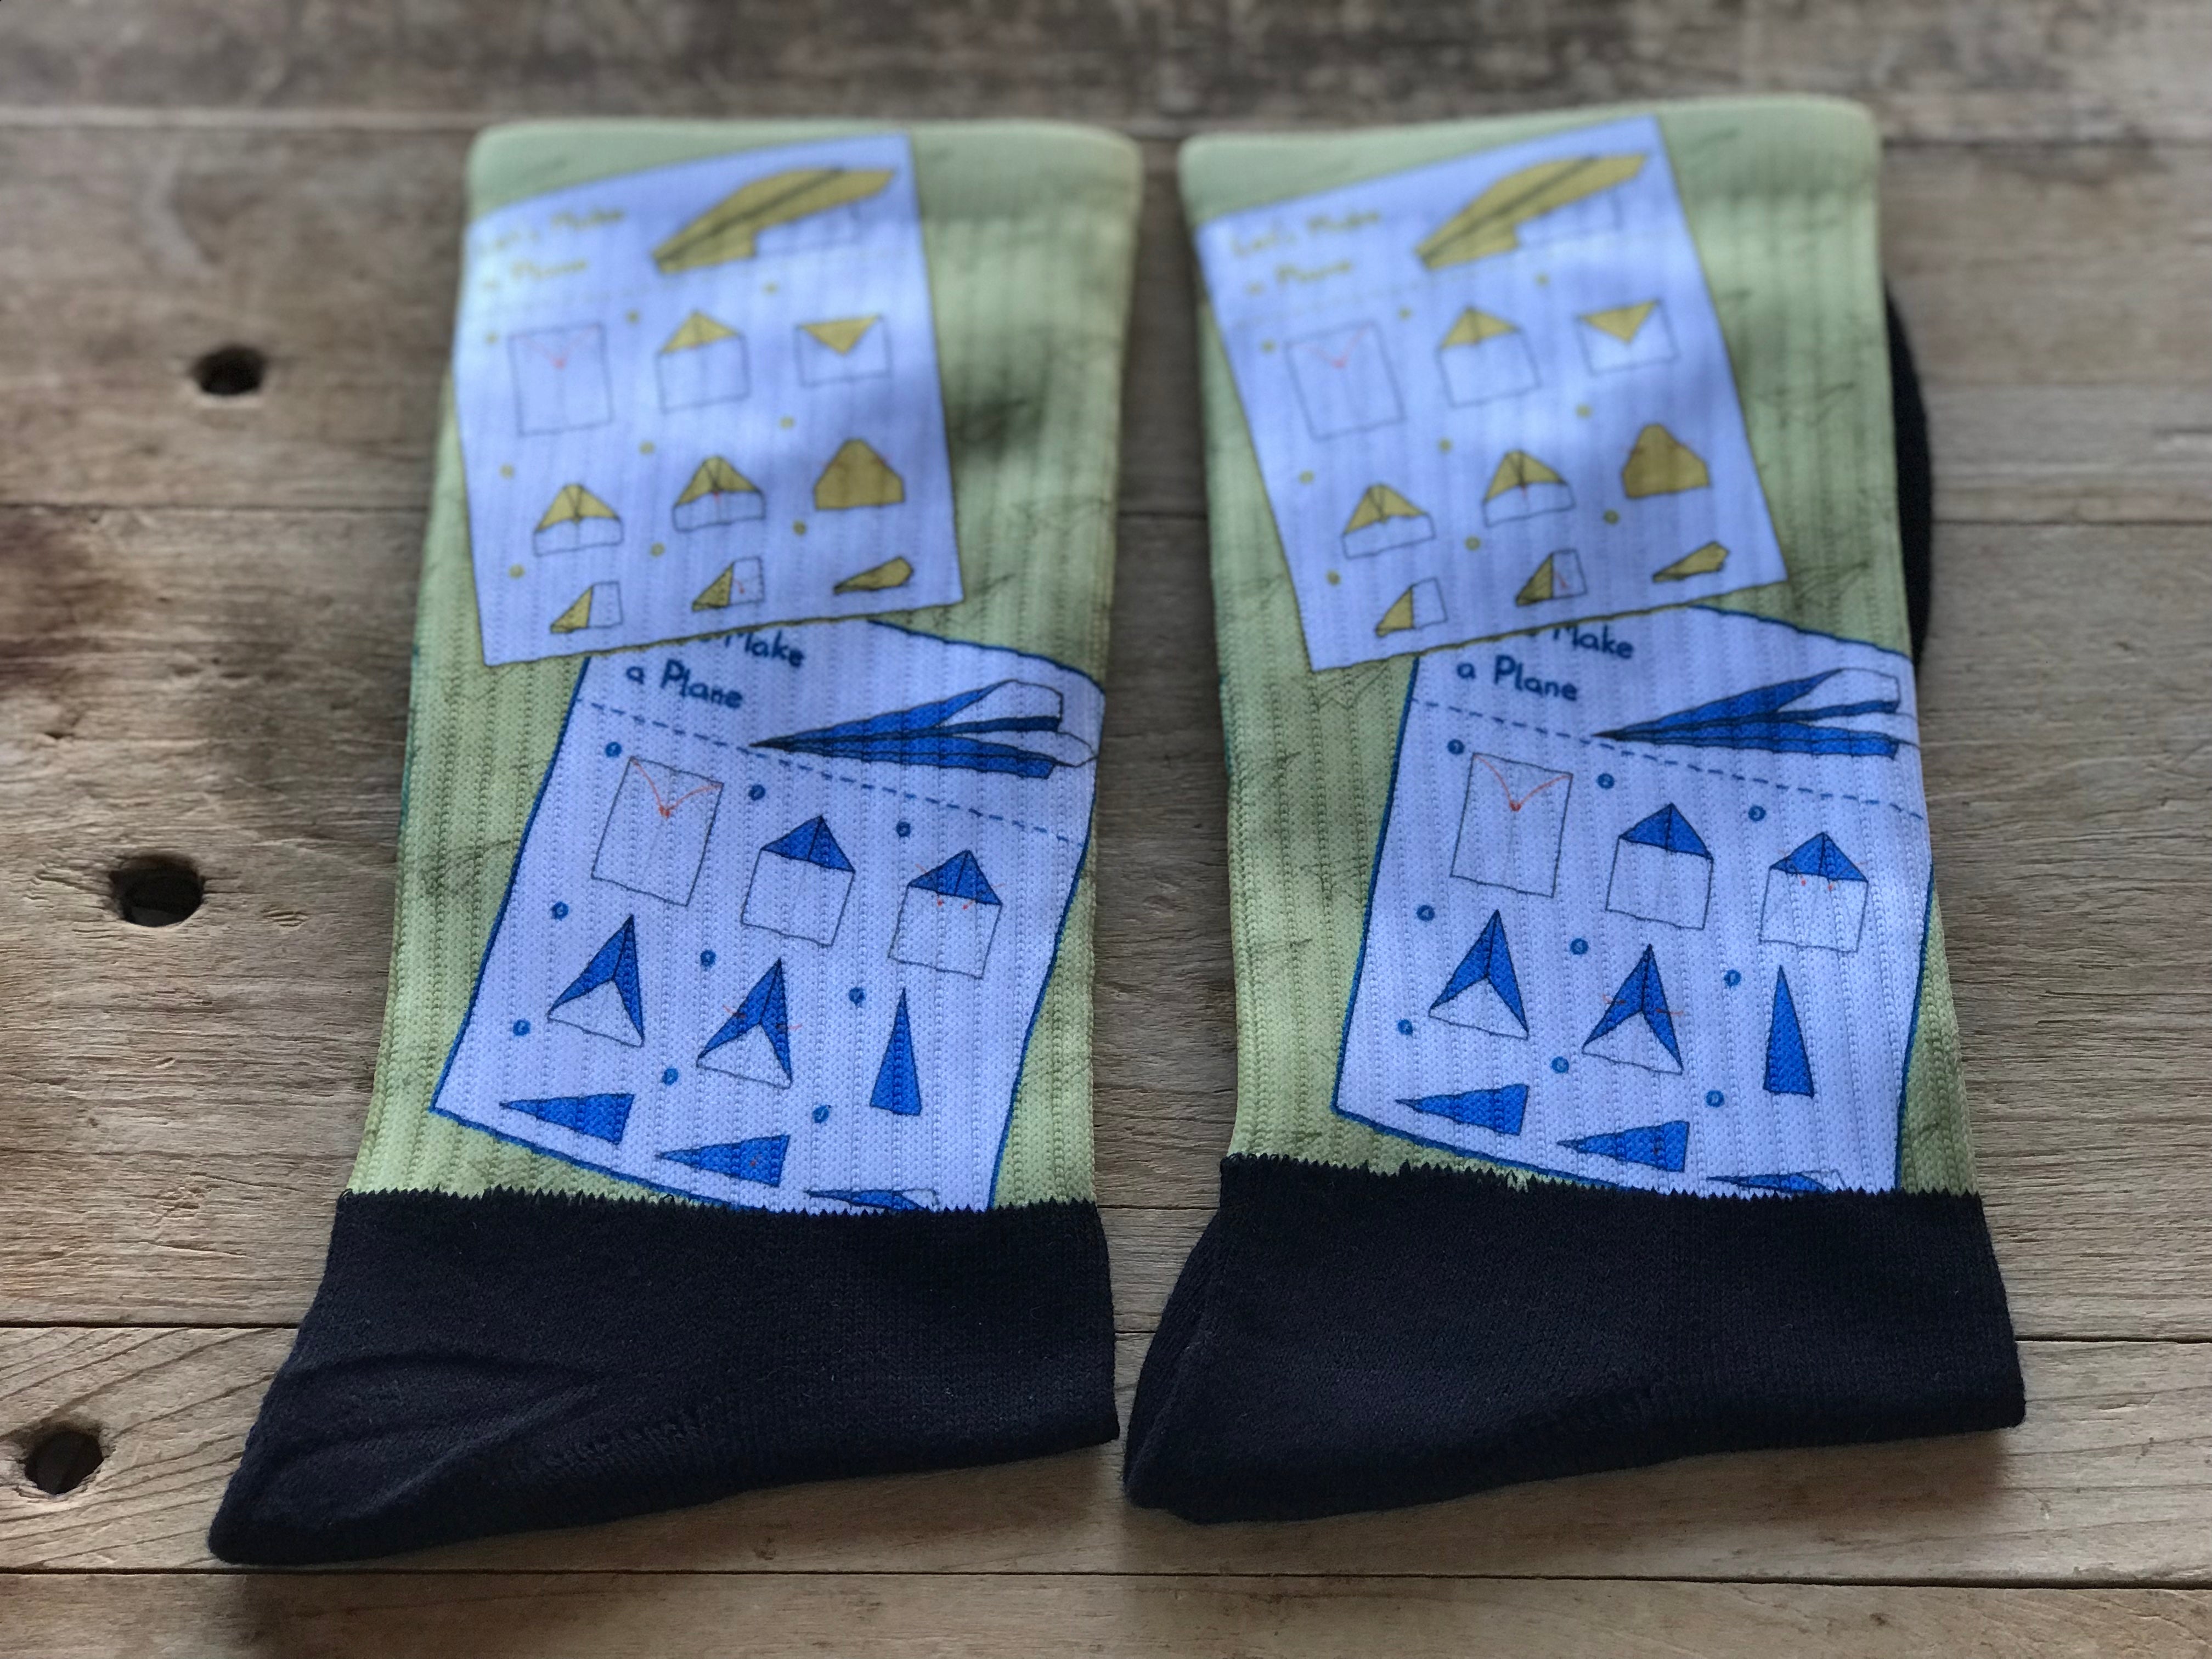 Let’s Make a Plane His & Hers Socks